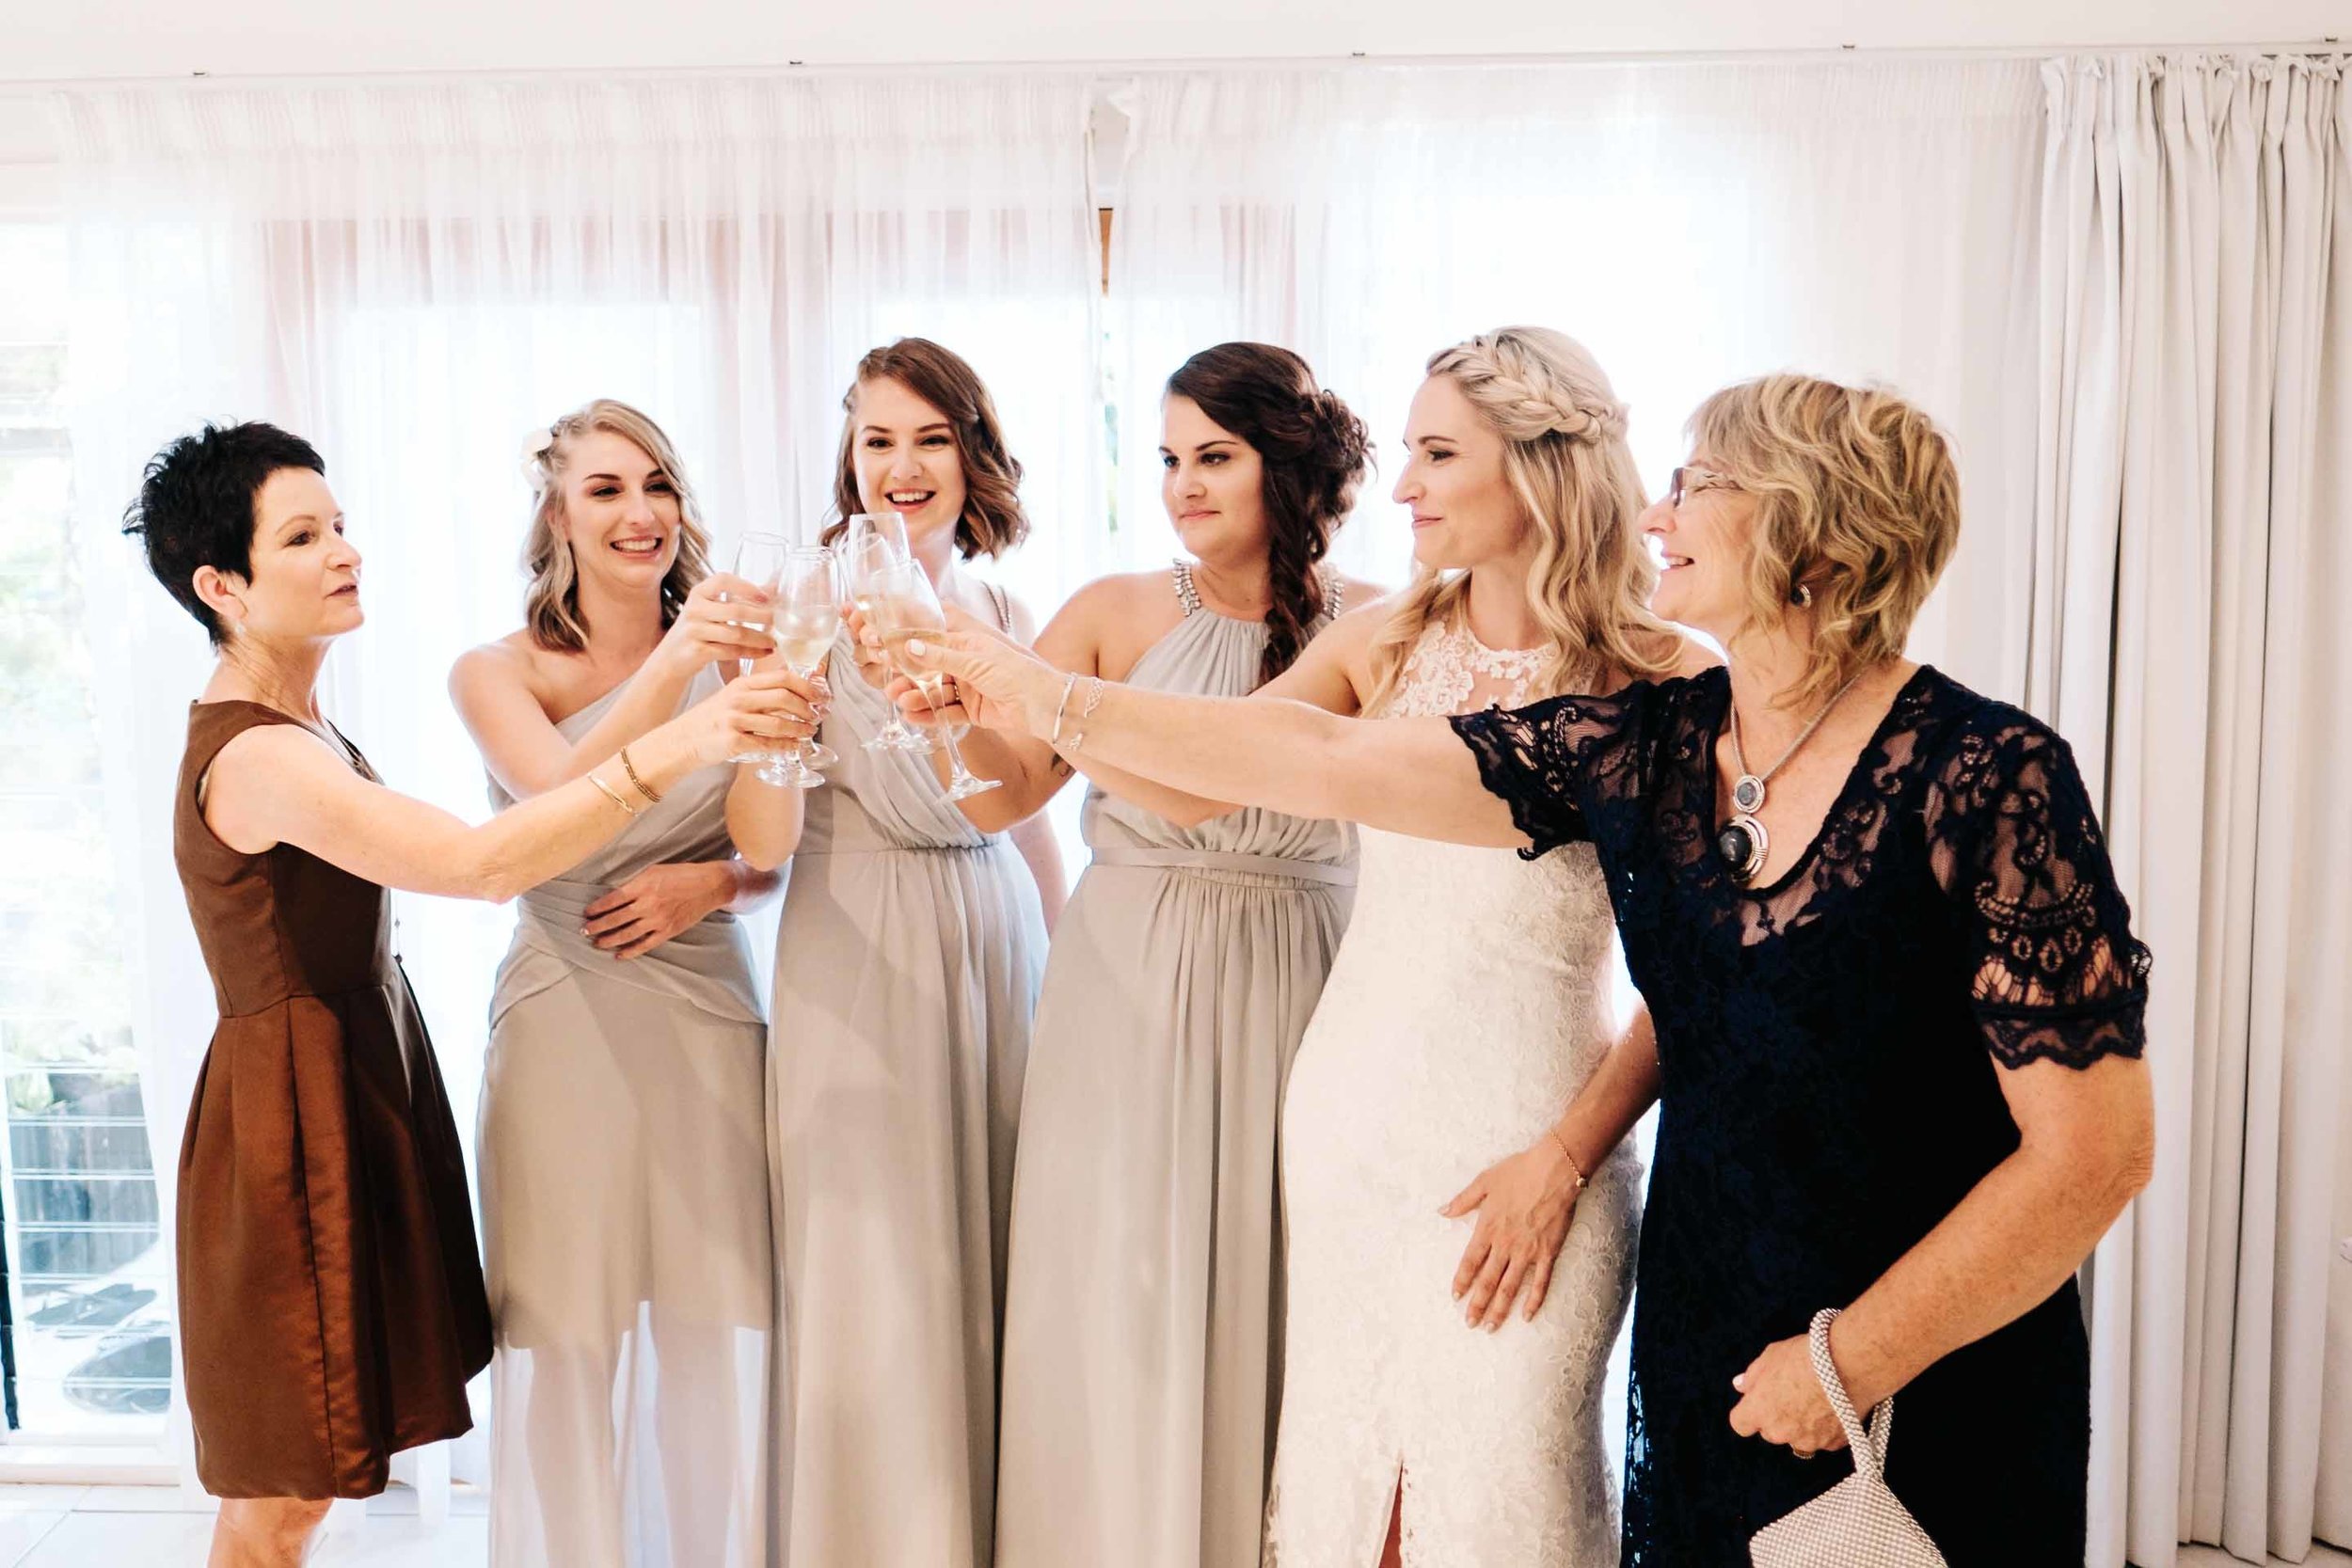 the bride and bridesmaids with the brides mother and aunt having a celebratory glass of champagne before the ceremony